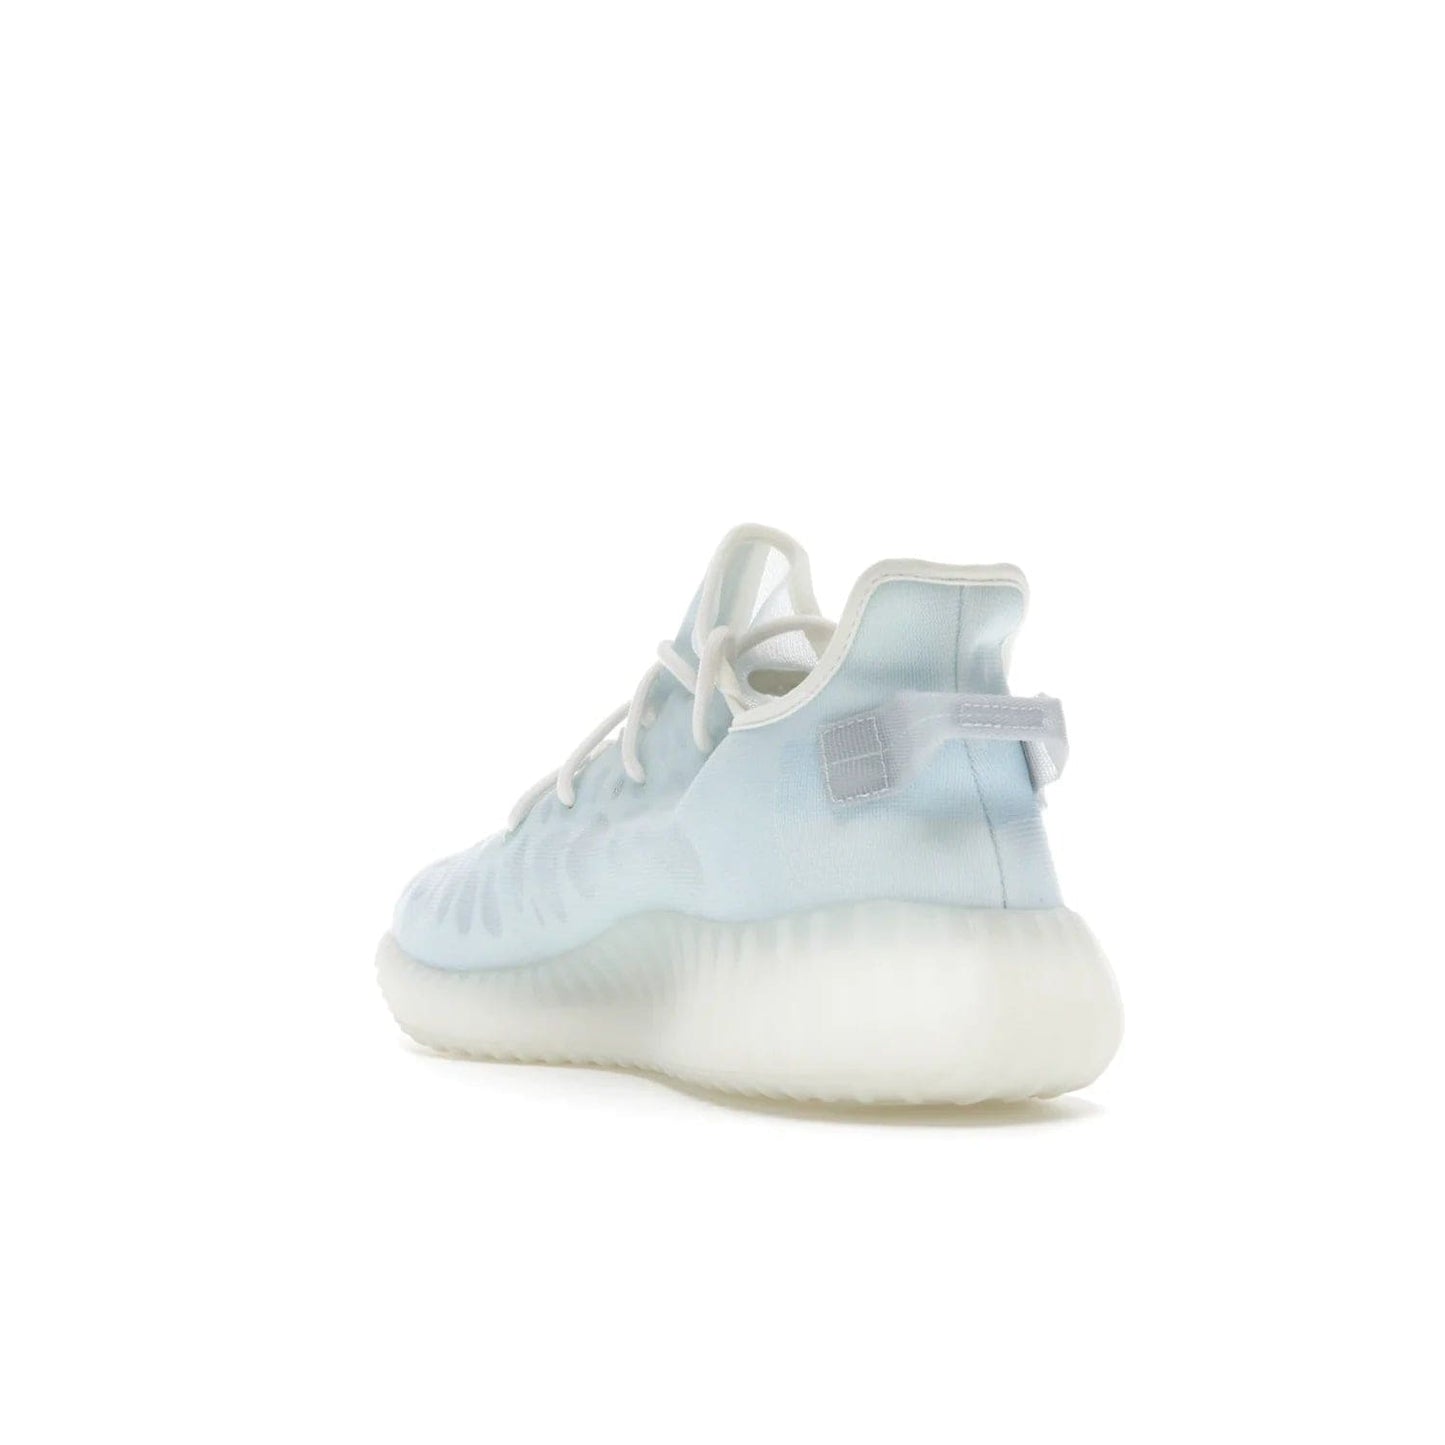 adidas Yeezy Boost 350 V2 Mono Ice - Image 25 - Only at www.BallersClubKickz.com - Introducing the adidas Yeezy 350 V2 Mono Ice - a sleek monofilament mesh design in Ice blue with Boost sole and heel pull tab. Released exclusively in the US for $220.